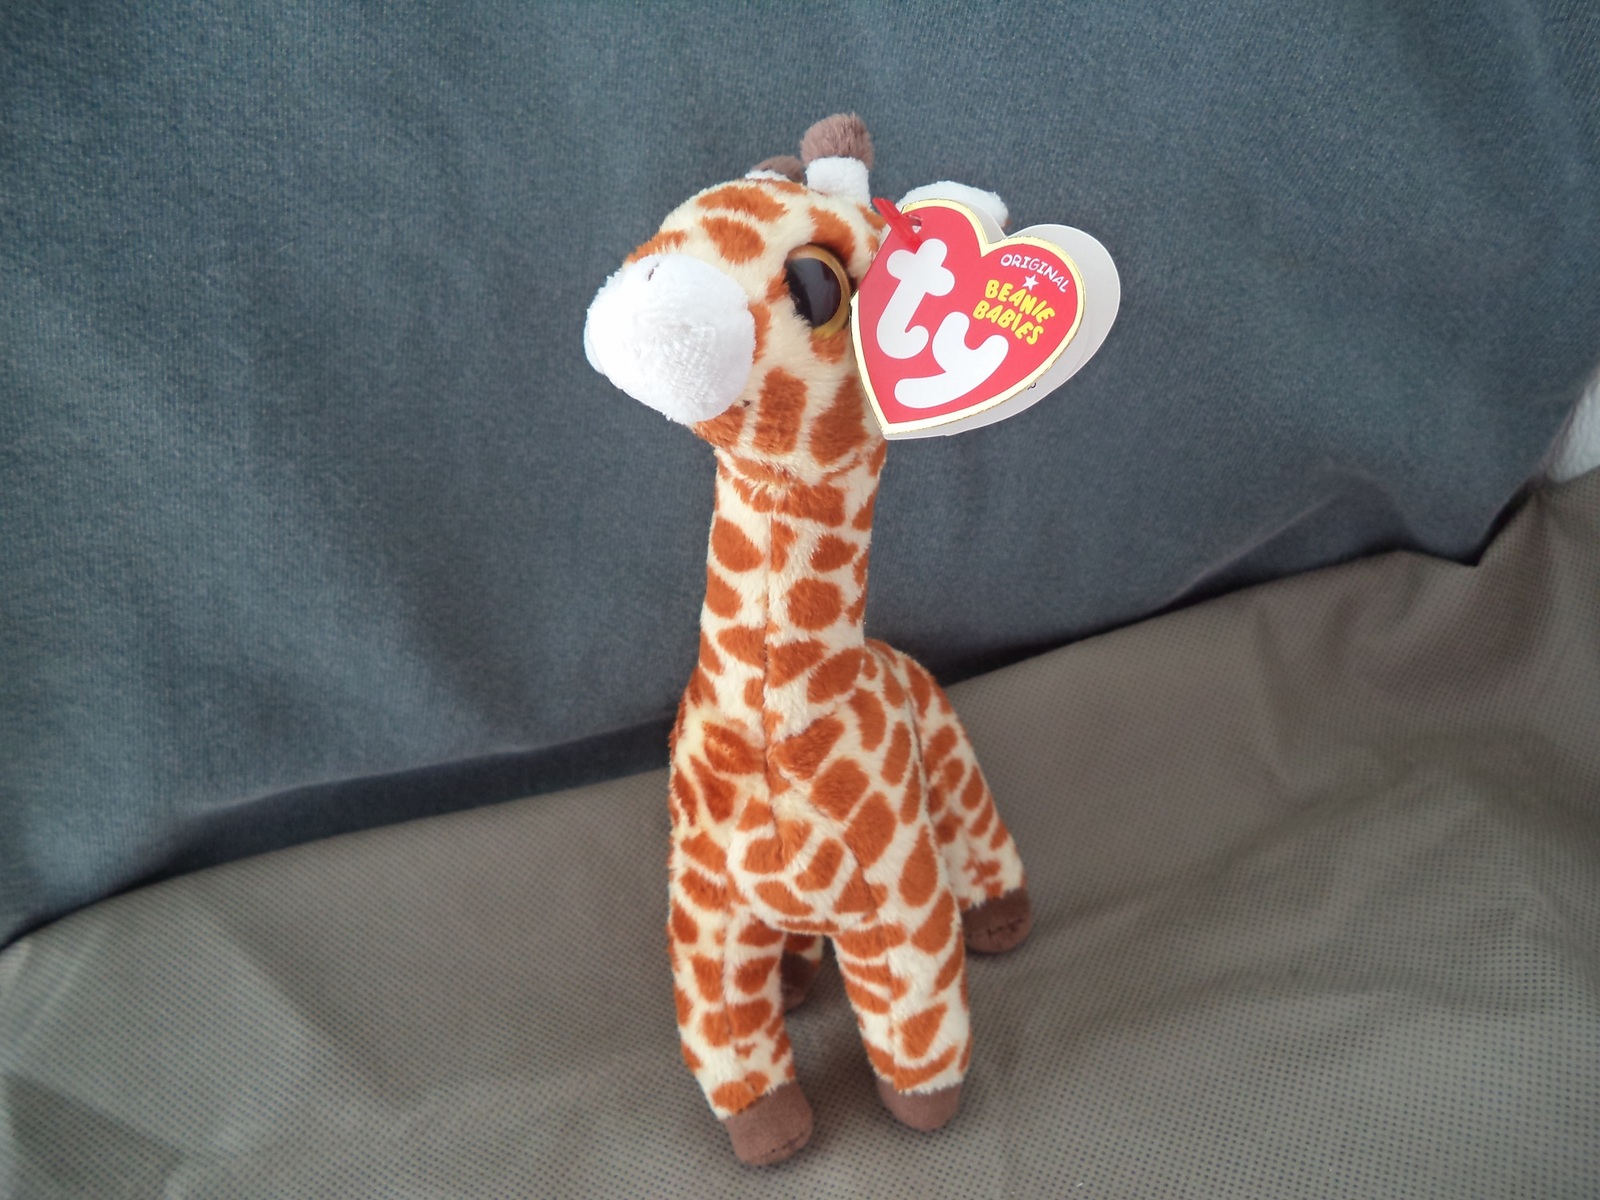 Ty Beanie Baby Babies Topper the Giraffe ,Big Eyed Version, 2012 Topper  - $5.50